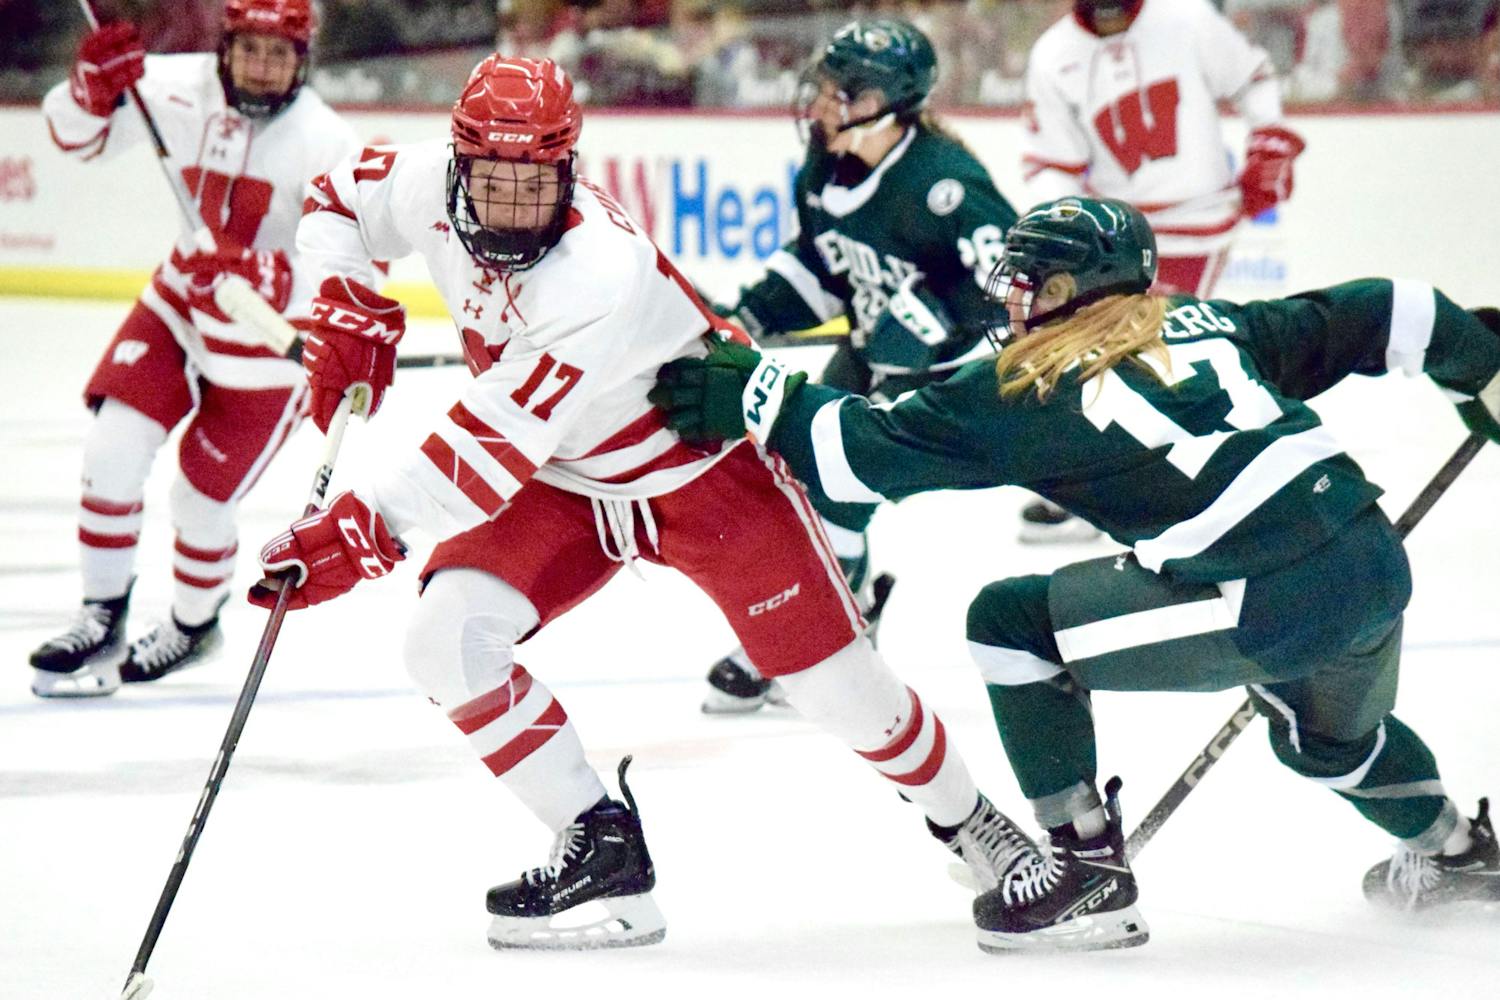 PHOTOS: Badgers beat the Beavers in third-period redemption, 4-0